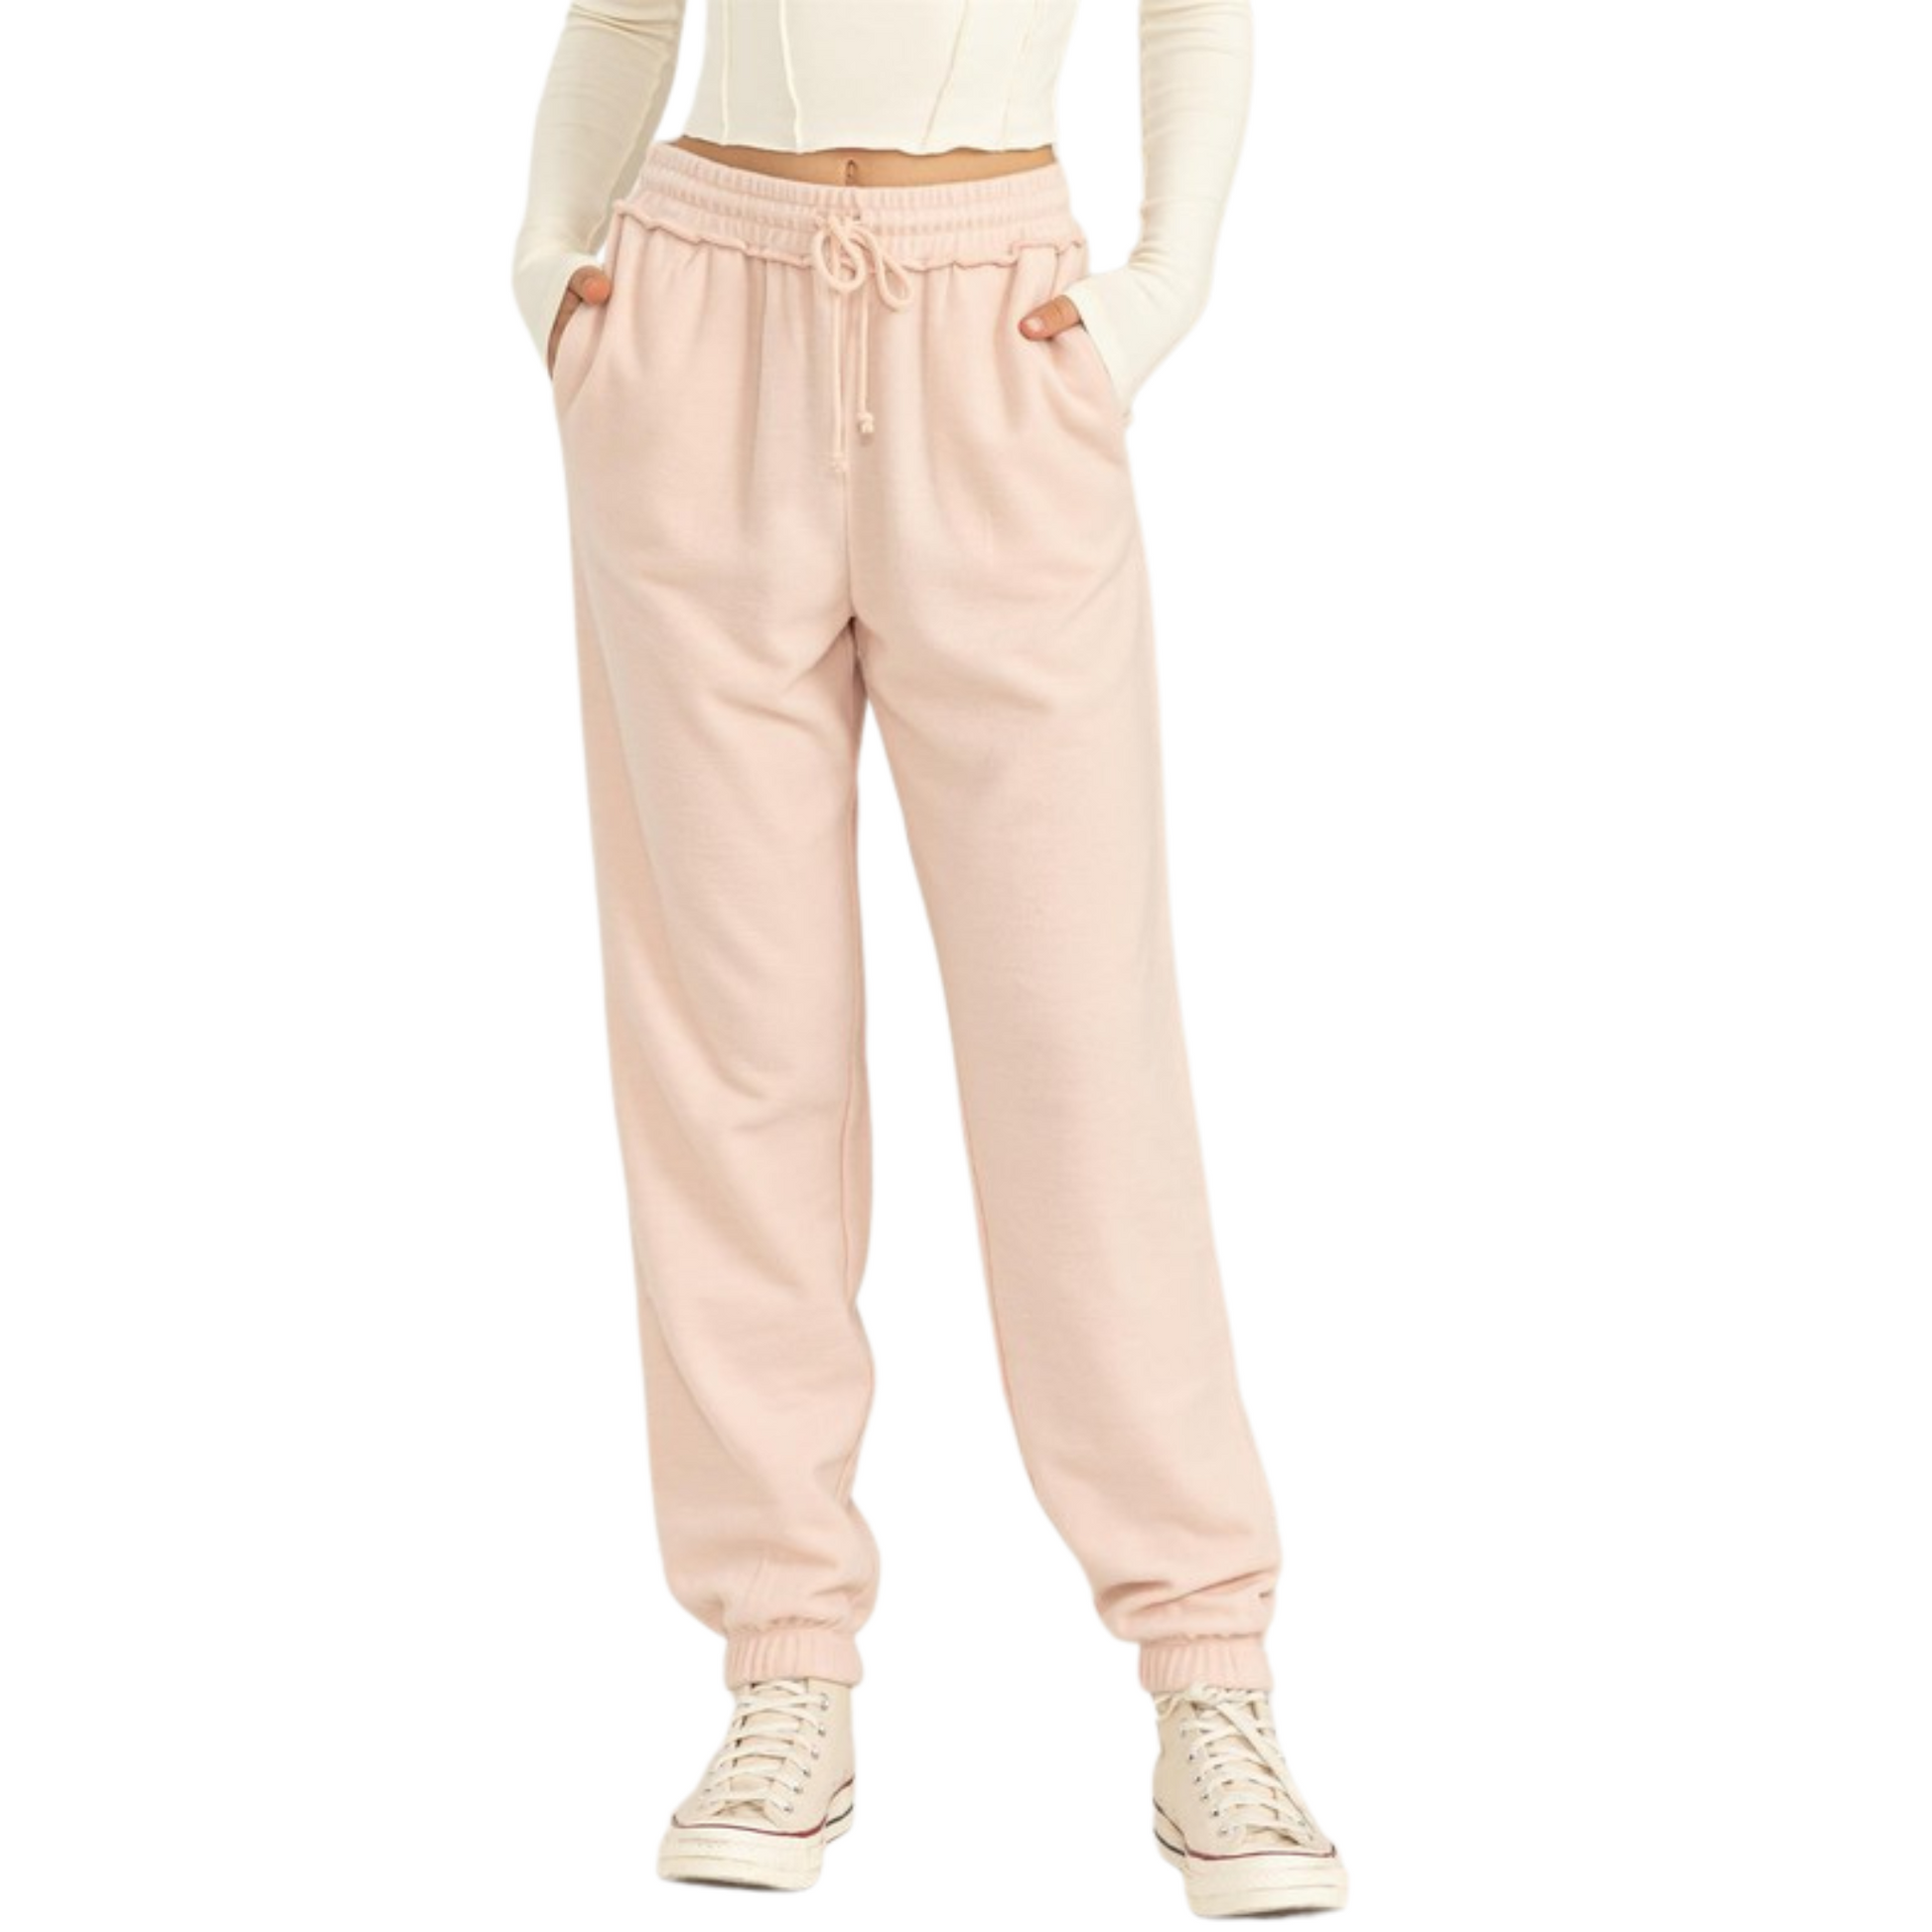 High waisted joggers in dusty pink